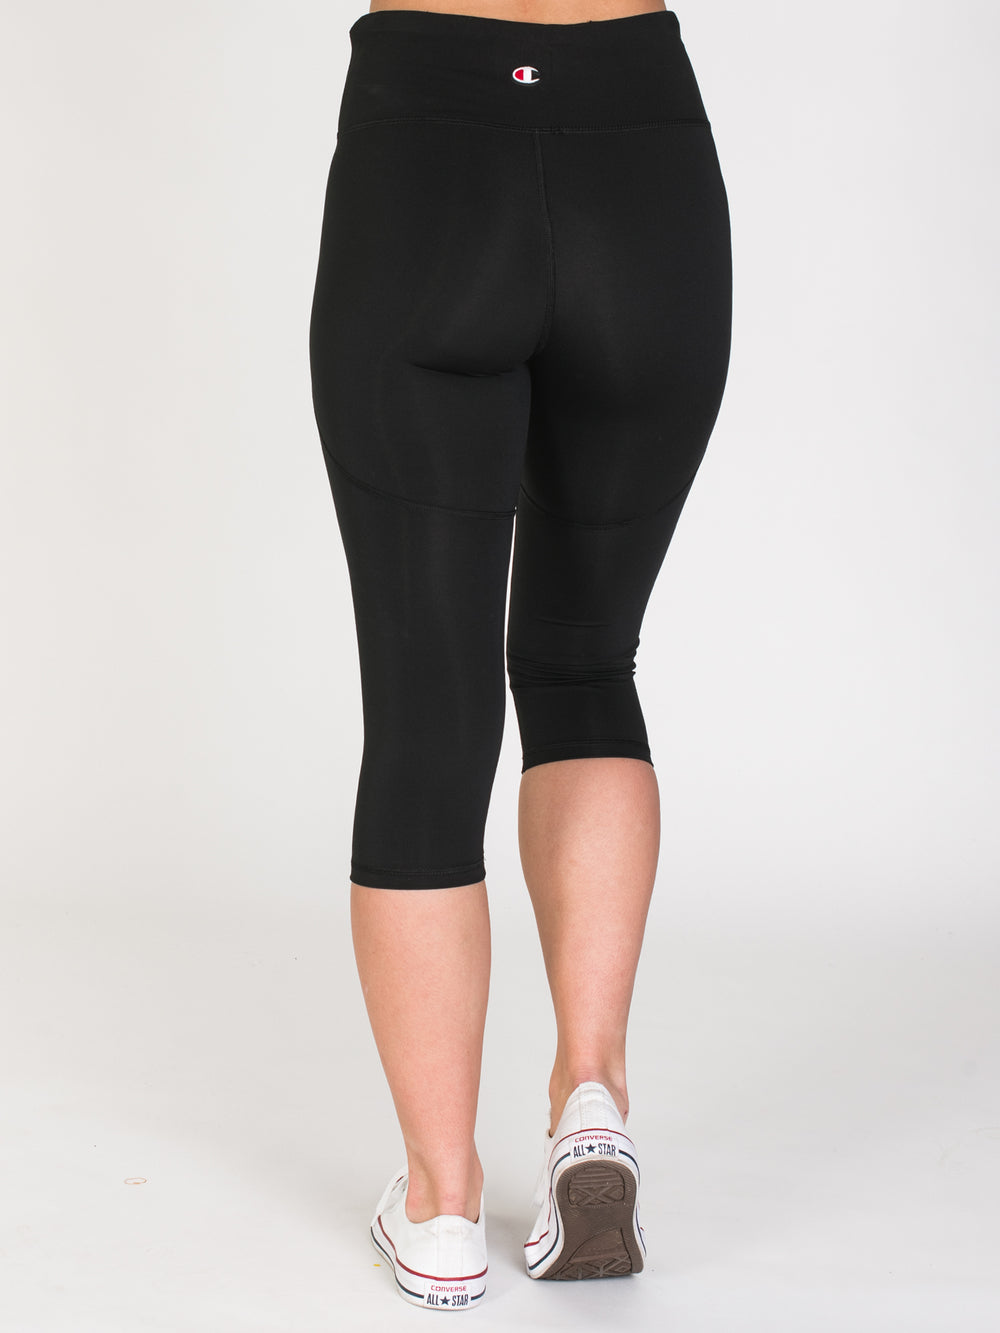 CHAMPION SPORT KNEE TIGHT  - CLEARANCE